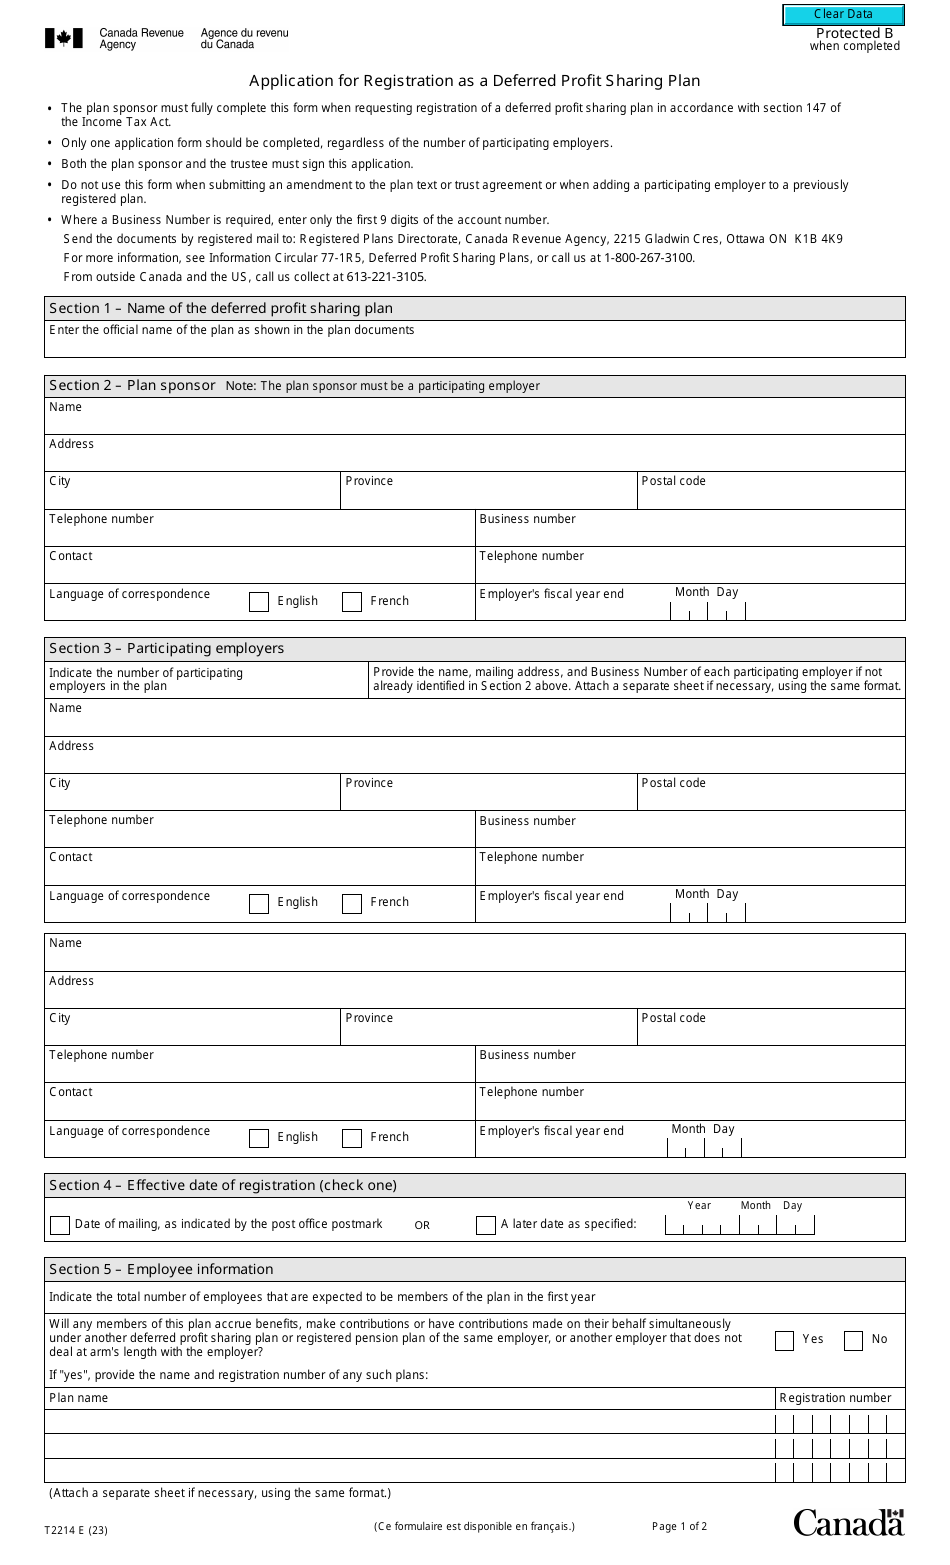 Form T2214 Application for Registration as a Deferred Profit Sharing Plan - Canada, Page 1